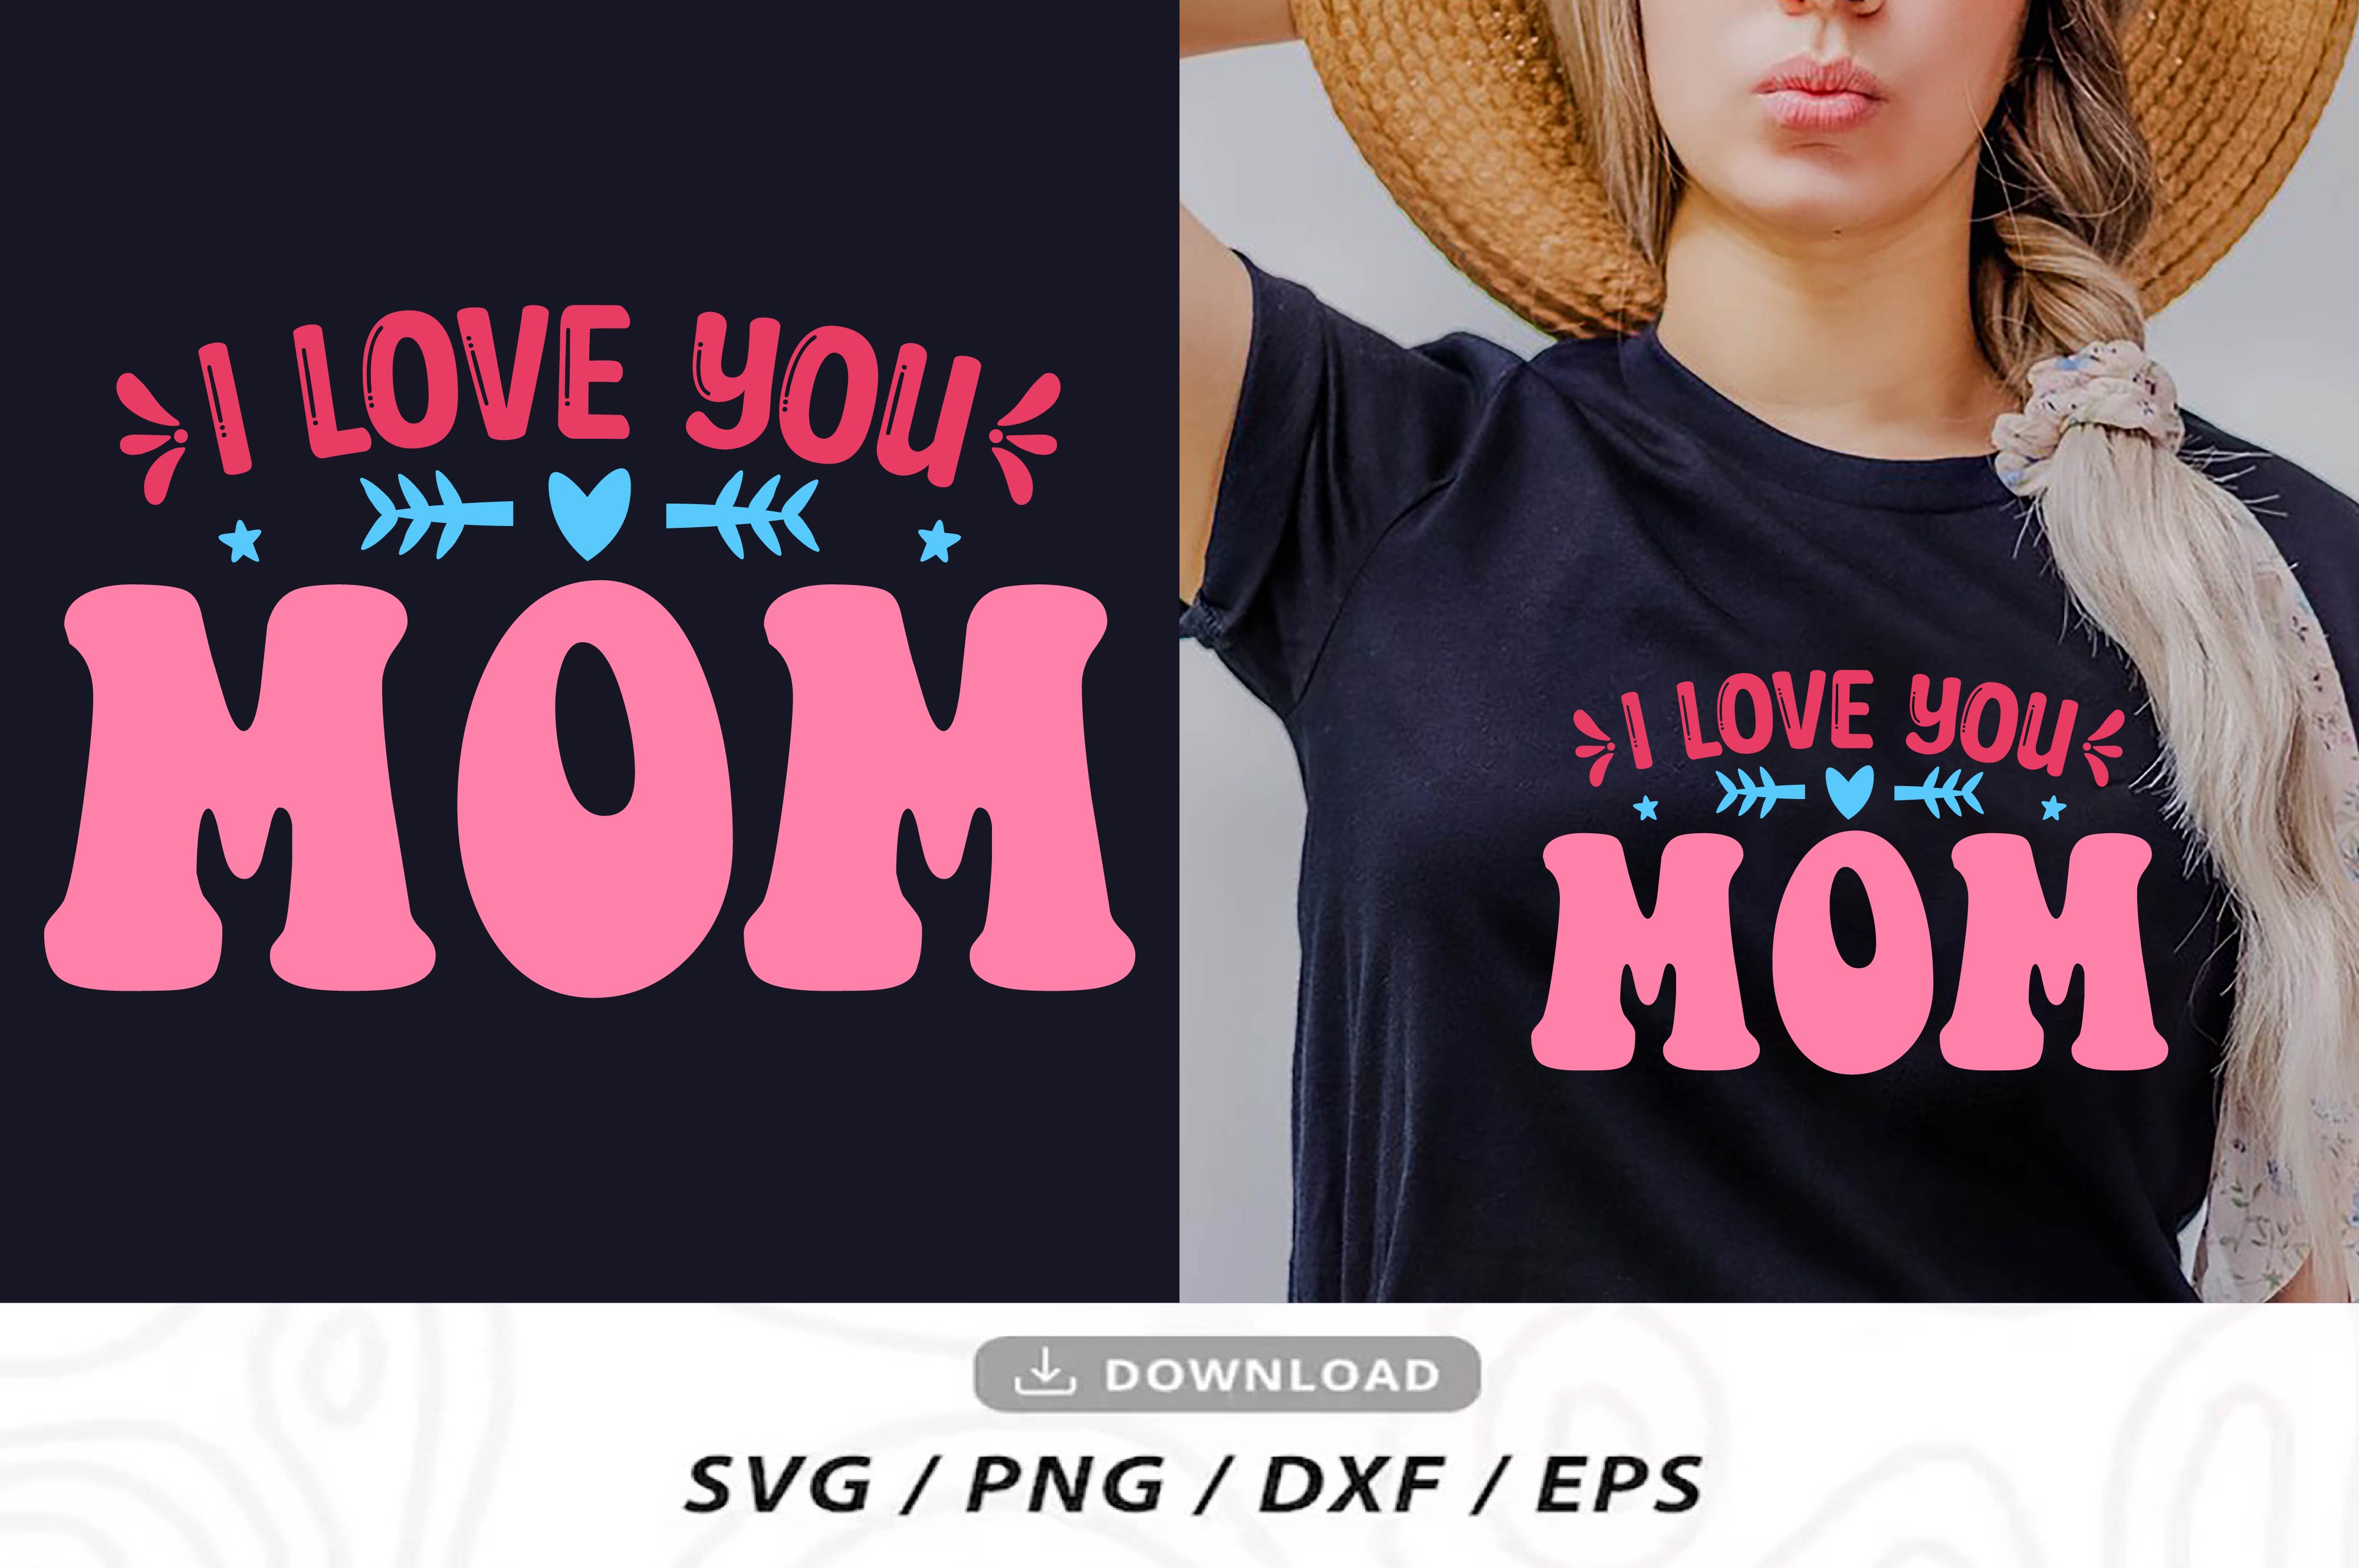 Woman wearing a t - shirt that says i love you mom.